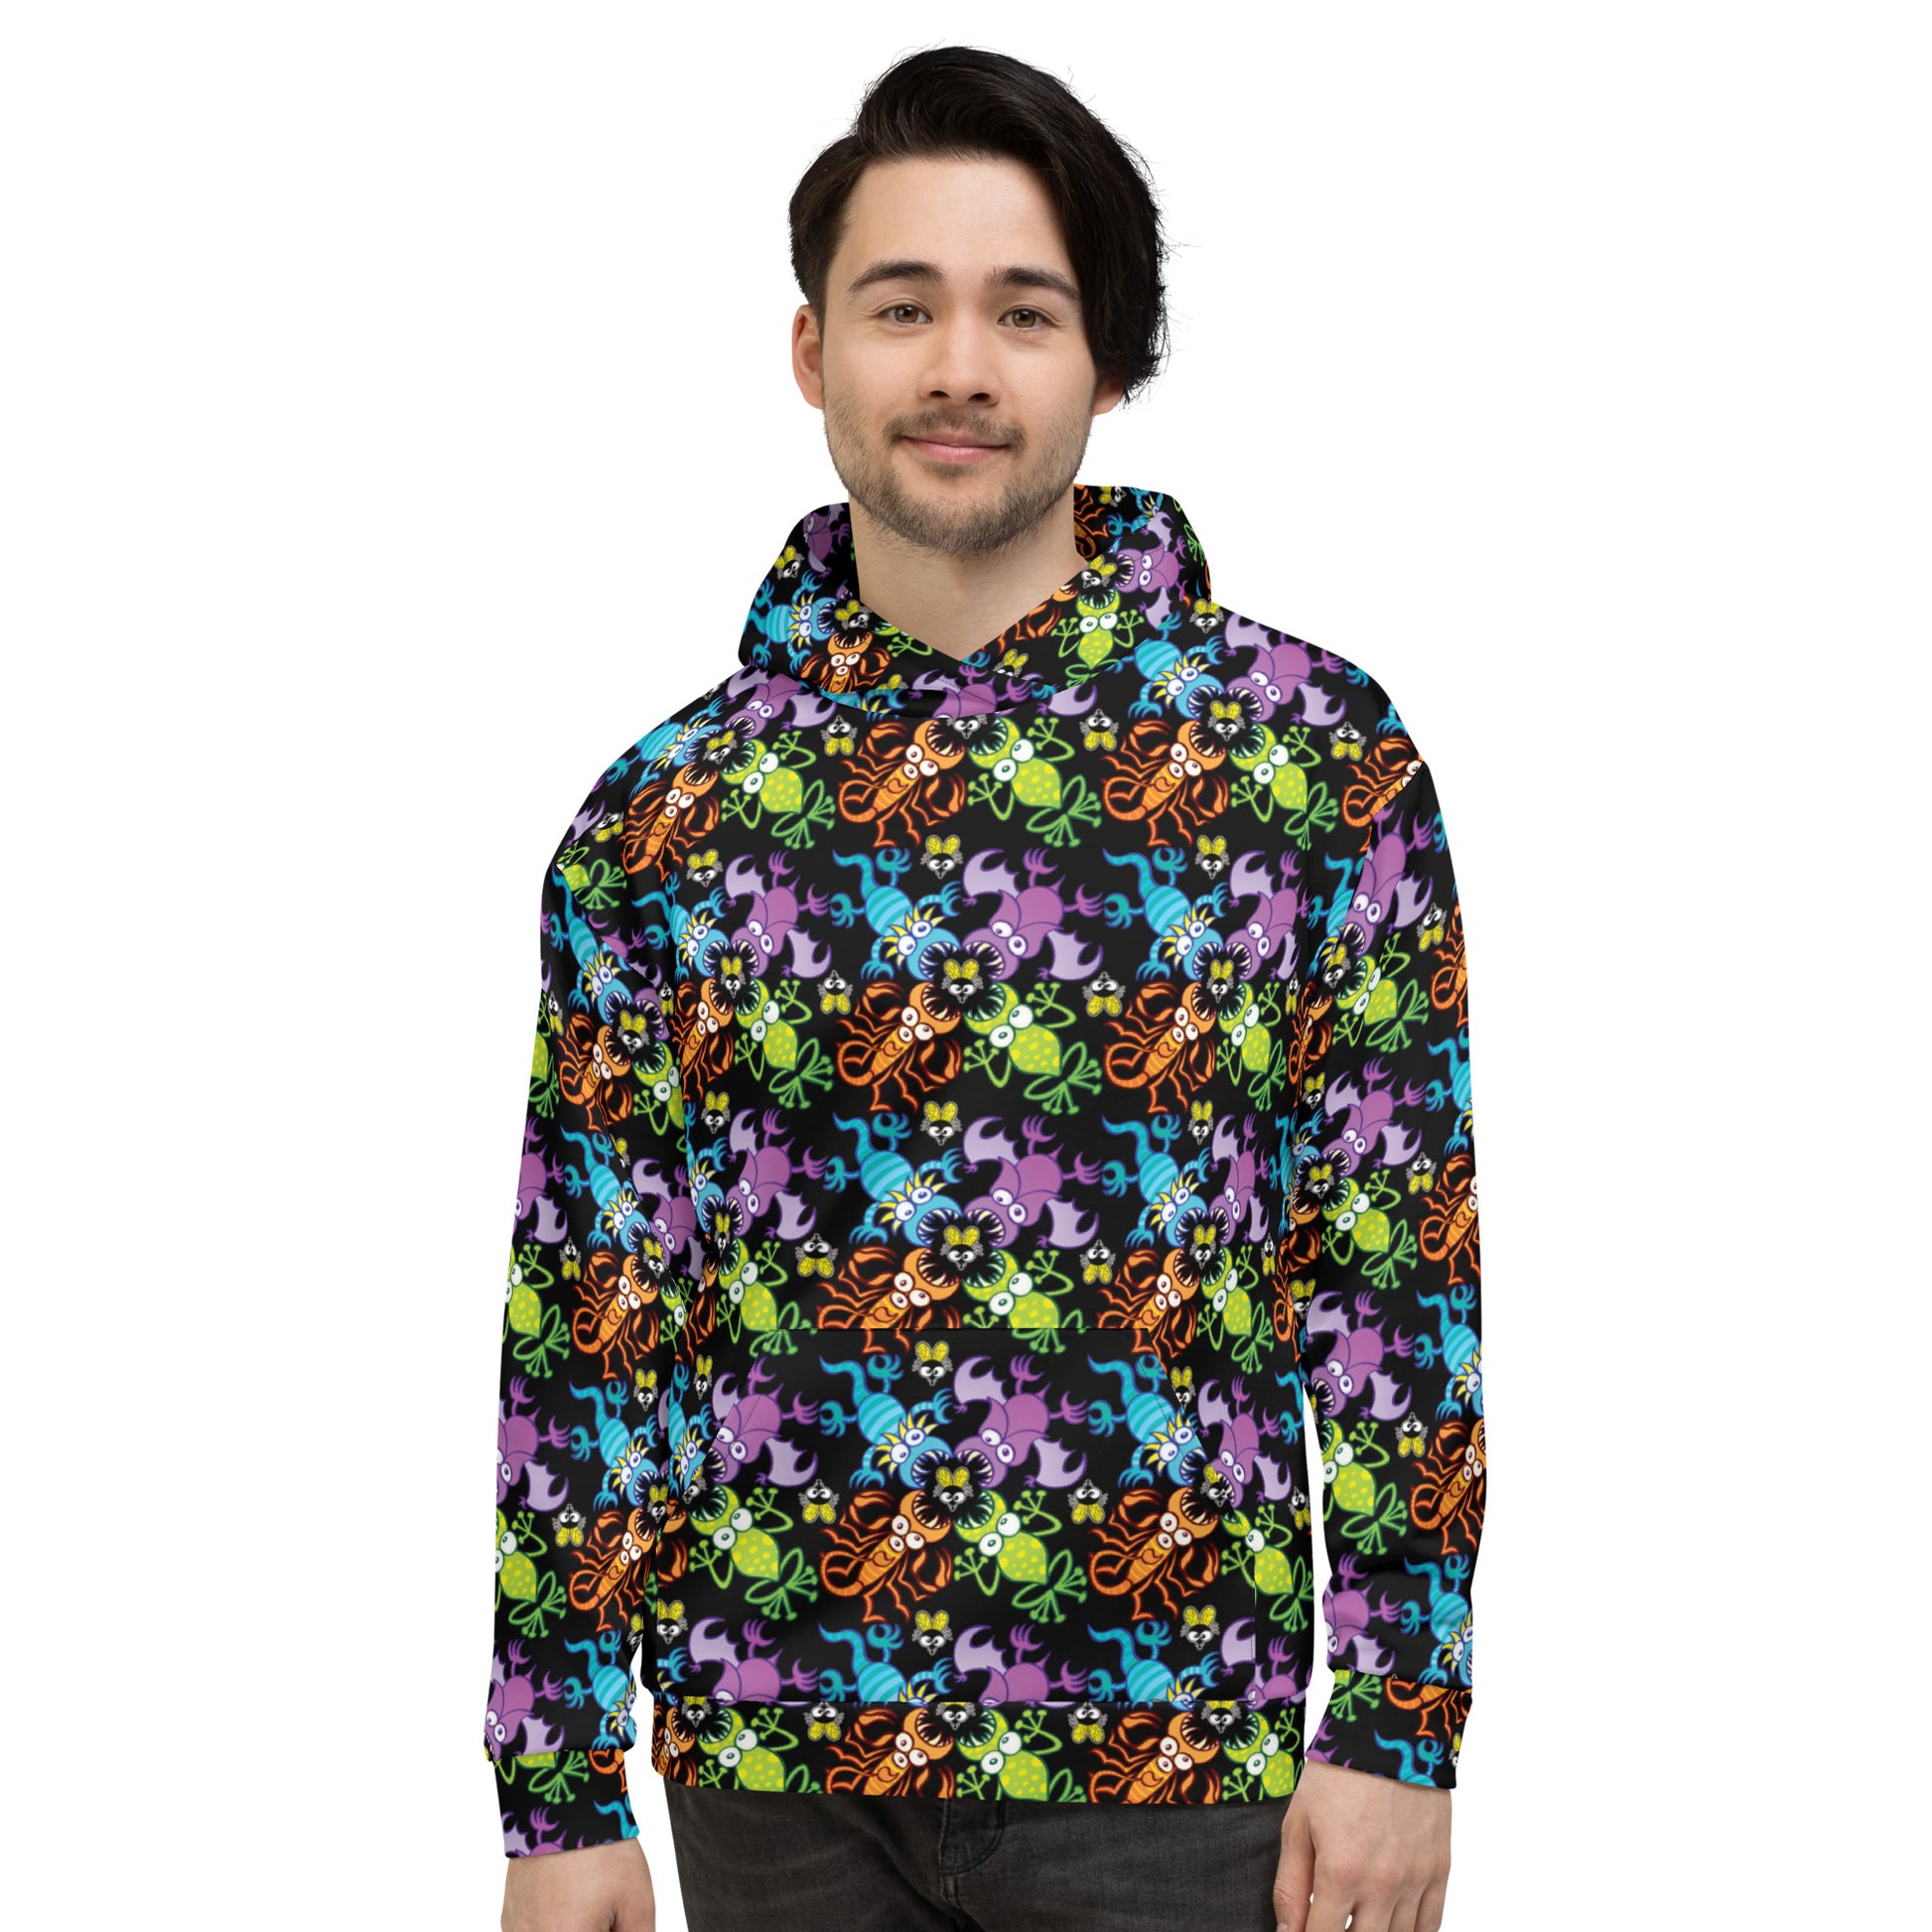 Smiling man wearing an Unisex Hoodie All-over printed with Bat, scorpion, lizard and frog fighting over an unlucky fly